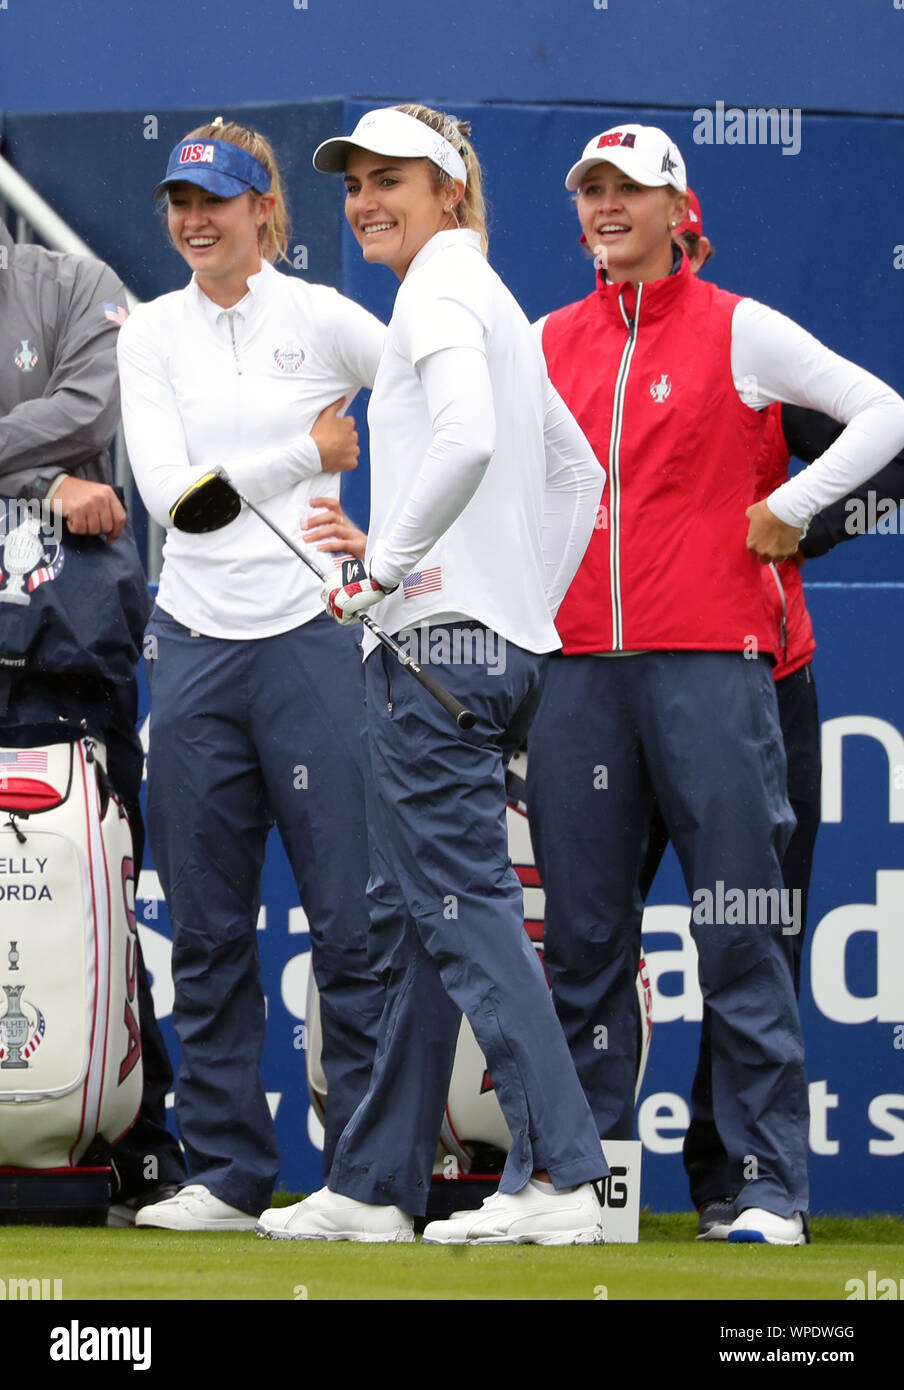 From left to right) Team USA's Nelly Korda, Lexi Thompson and Jessica Korda  on the 1st tee during preview day one of the 2019 Solheim Cup at Gleneagles  Golf Club, Auchterarder Stock